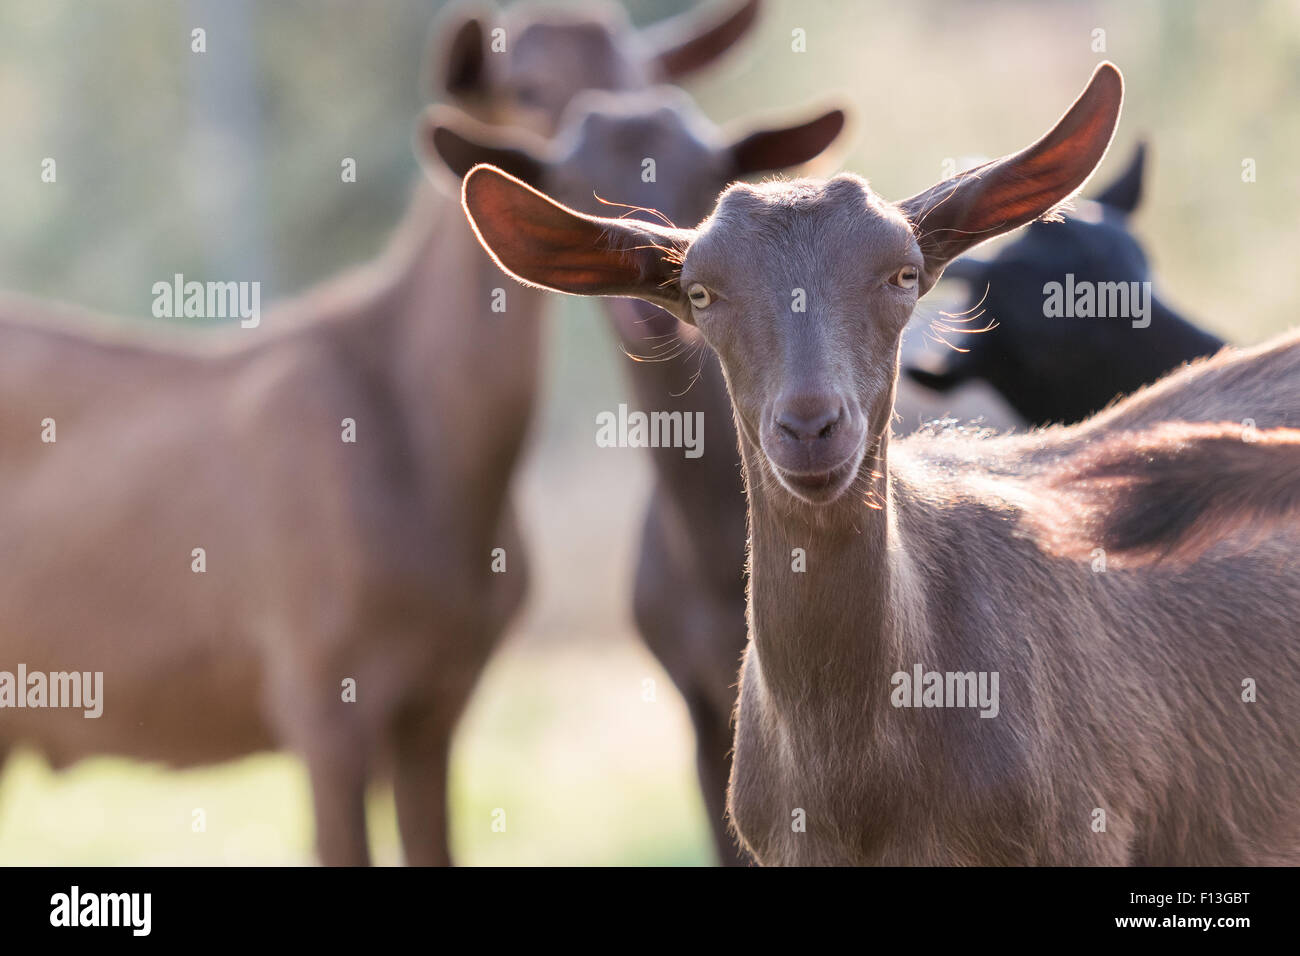 Goats in a farm. Stock Photo